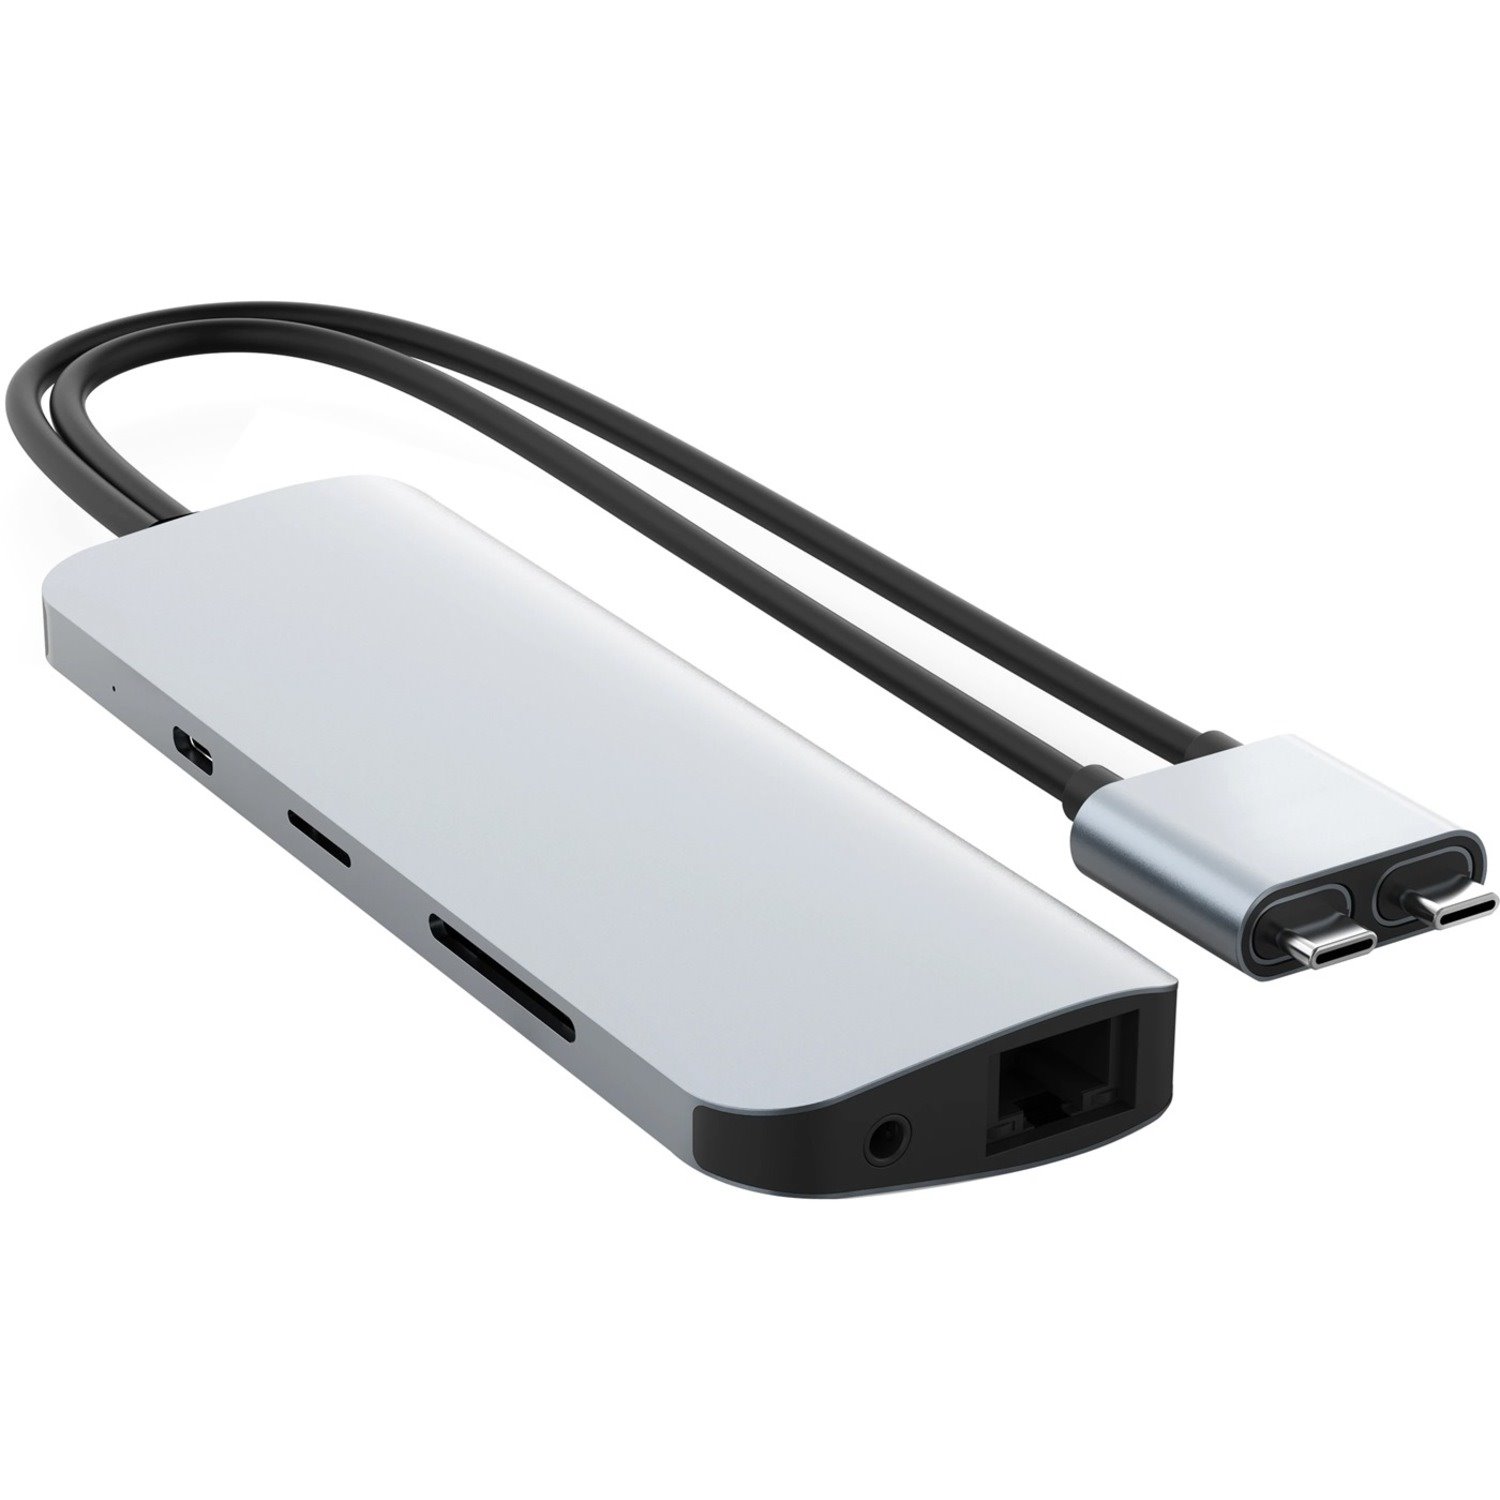 Hyper Viper HD392-SILVER USB Type C Docking Station for Notebook/Desktop PC - Memory Card Reader - SD - 60 W - Silver